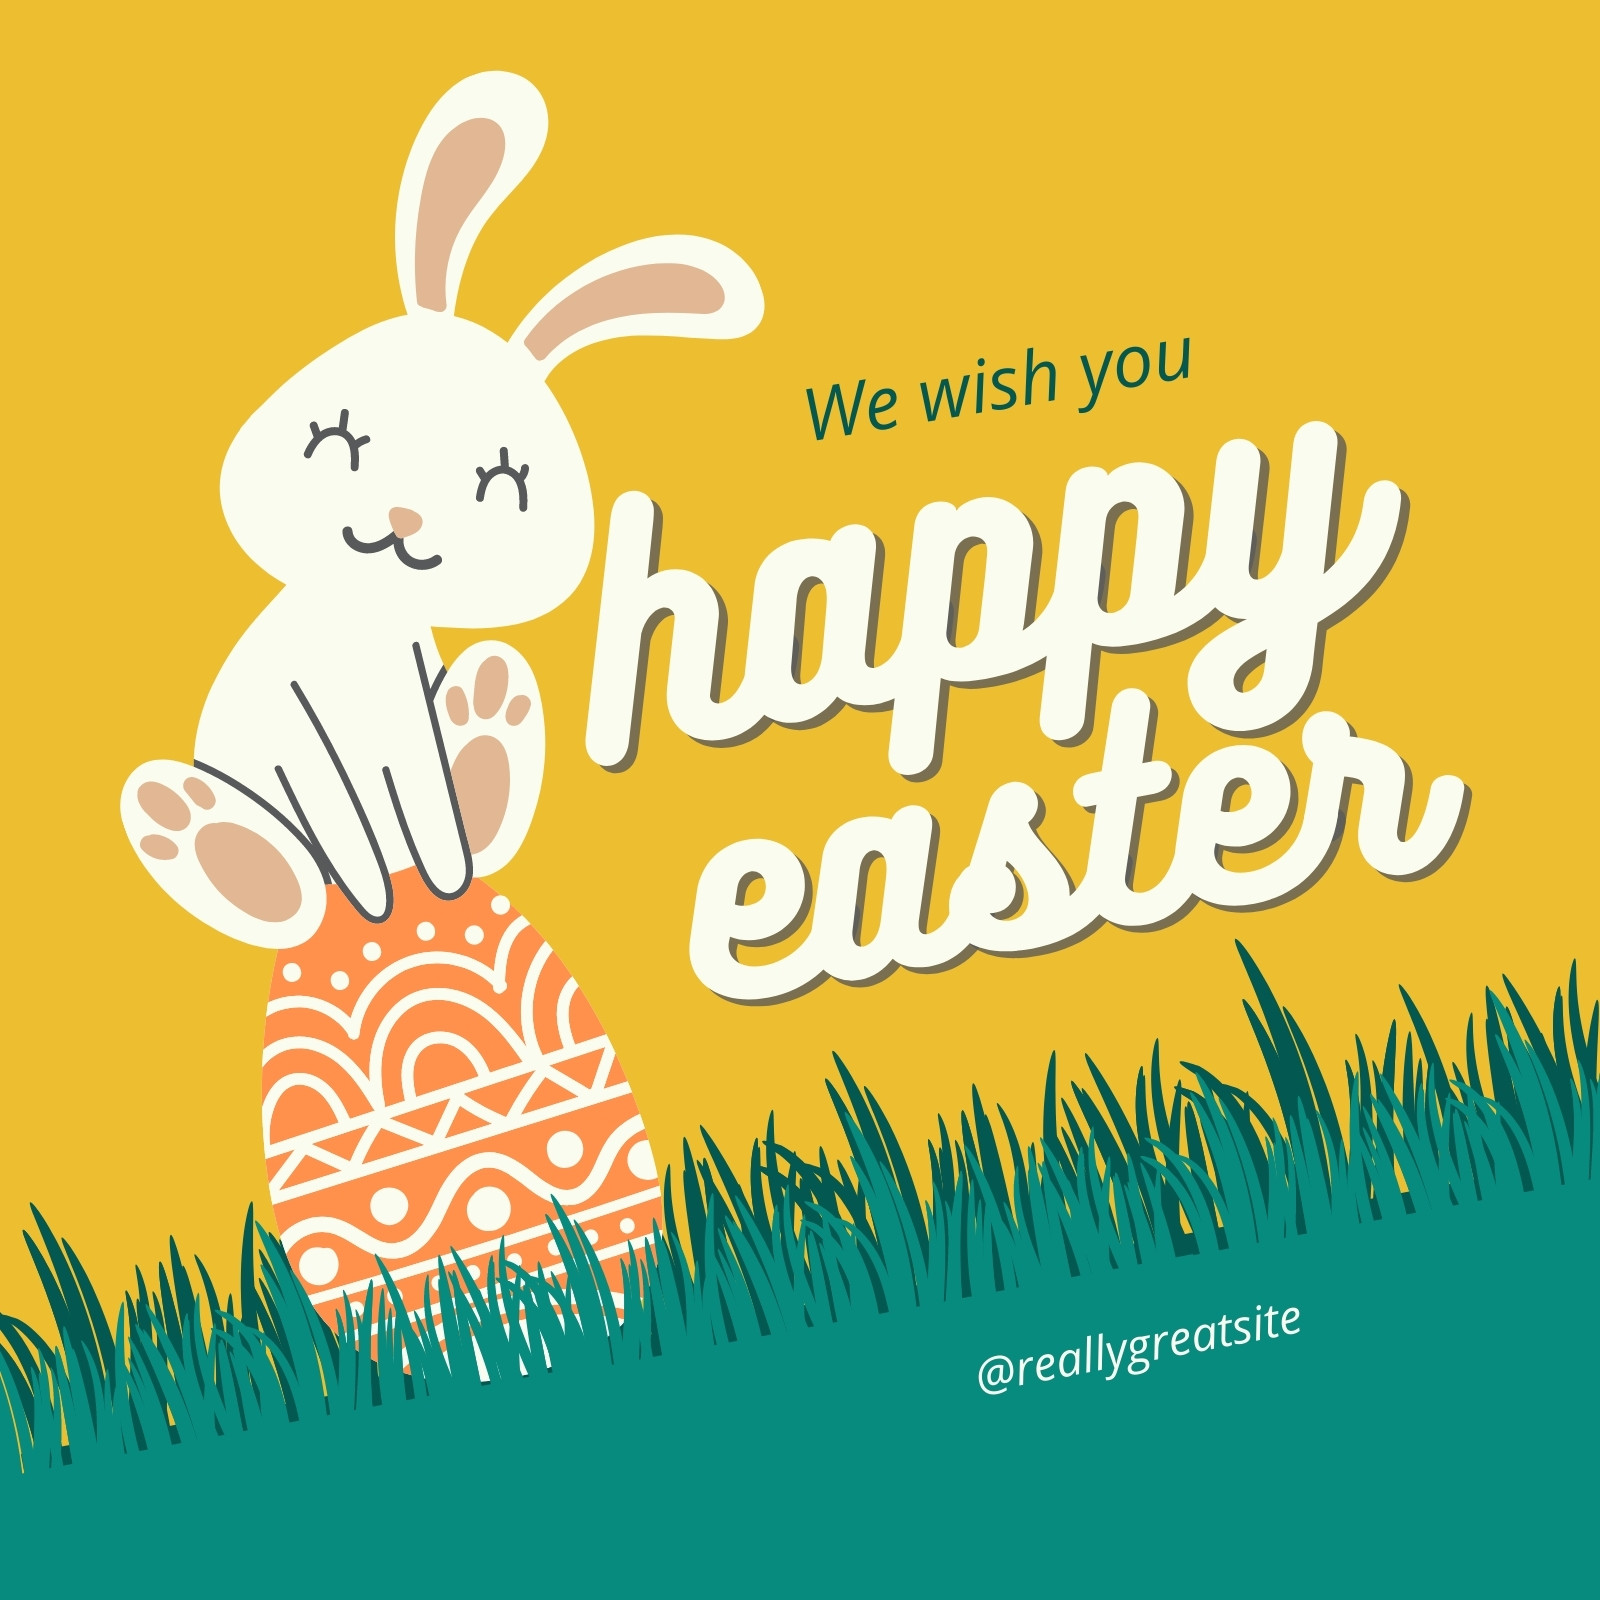 Free and customizable easter bunny templates